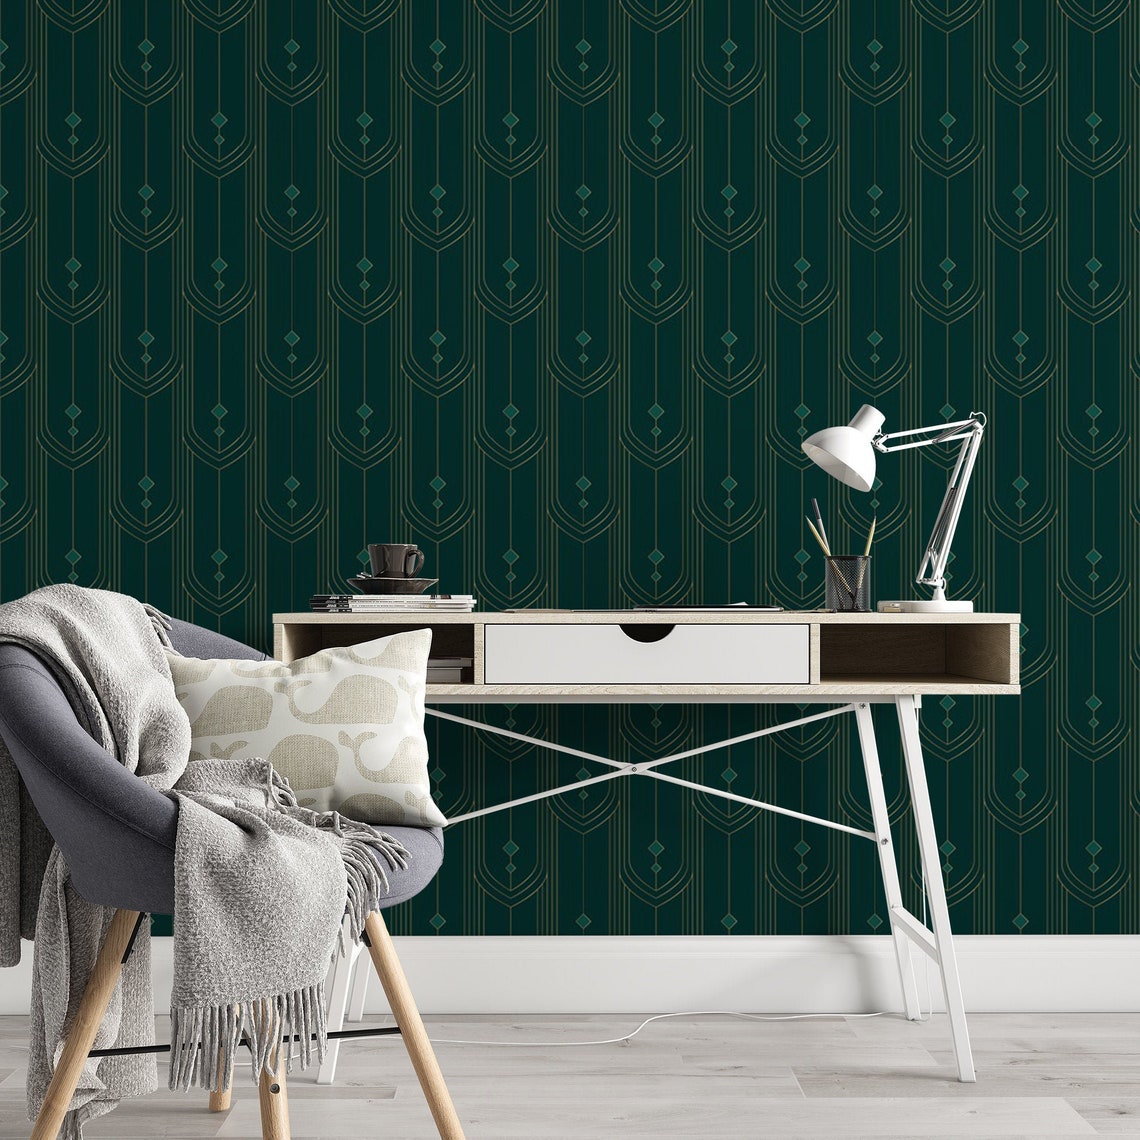 Green Pattern Removable Wallpaper Oblong Shapes Wall Decal - Etsy